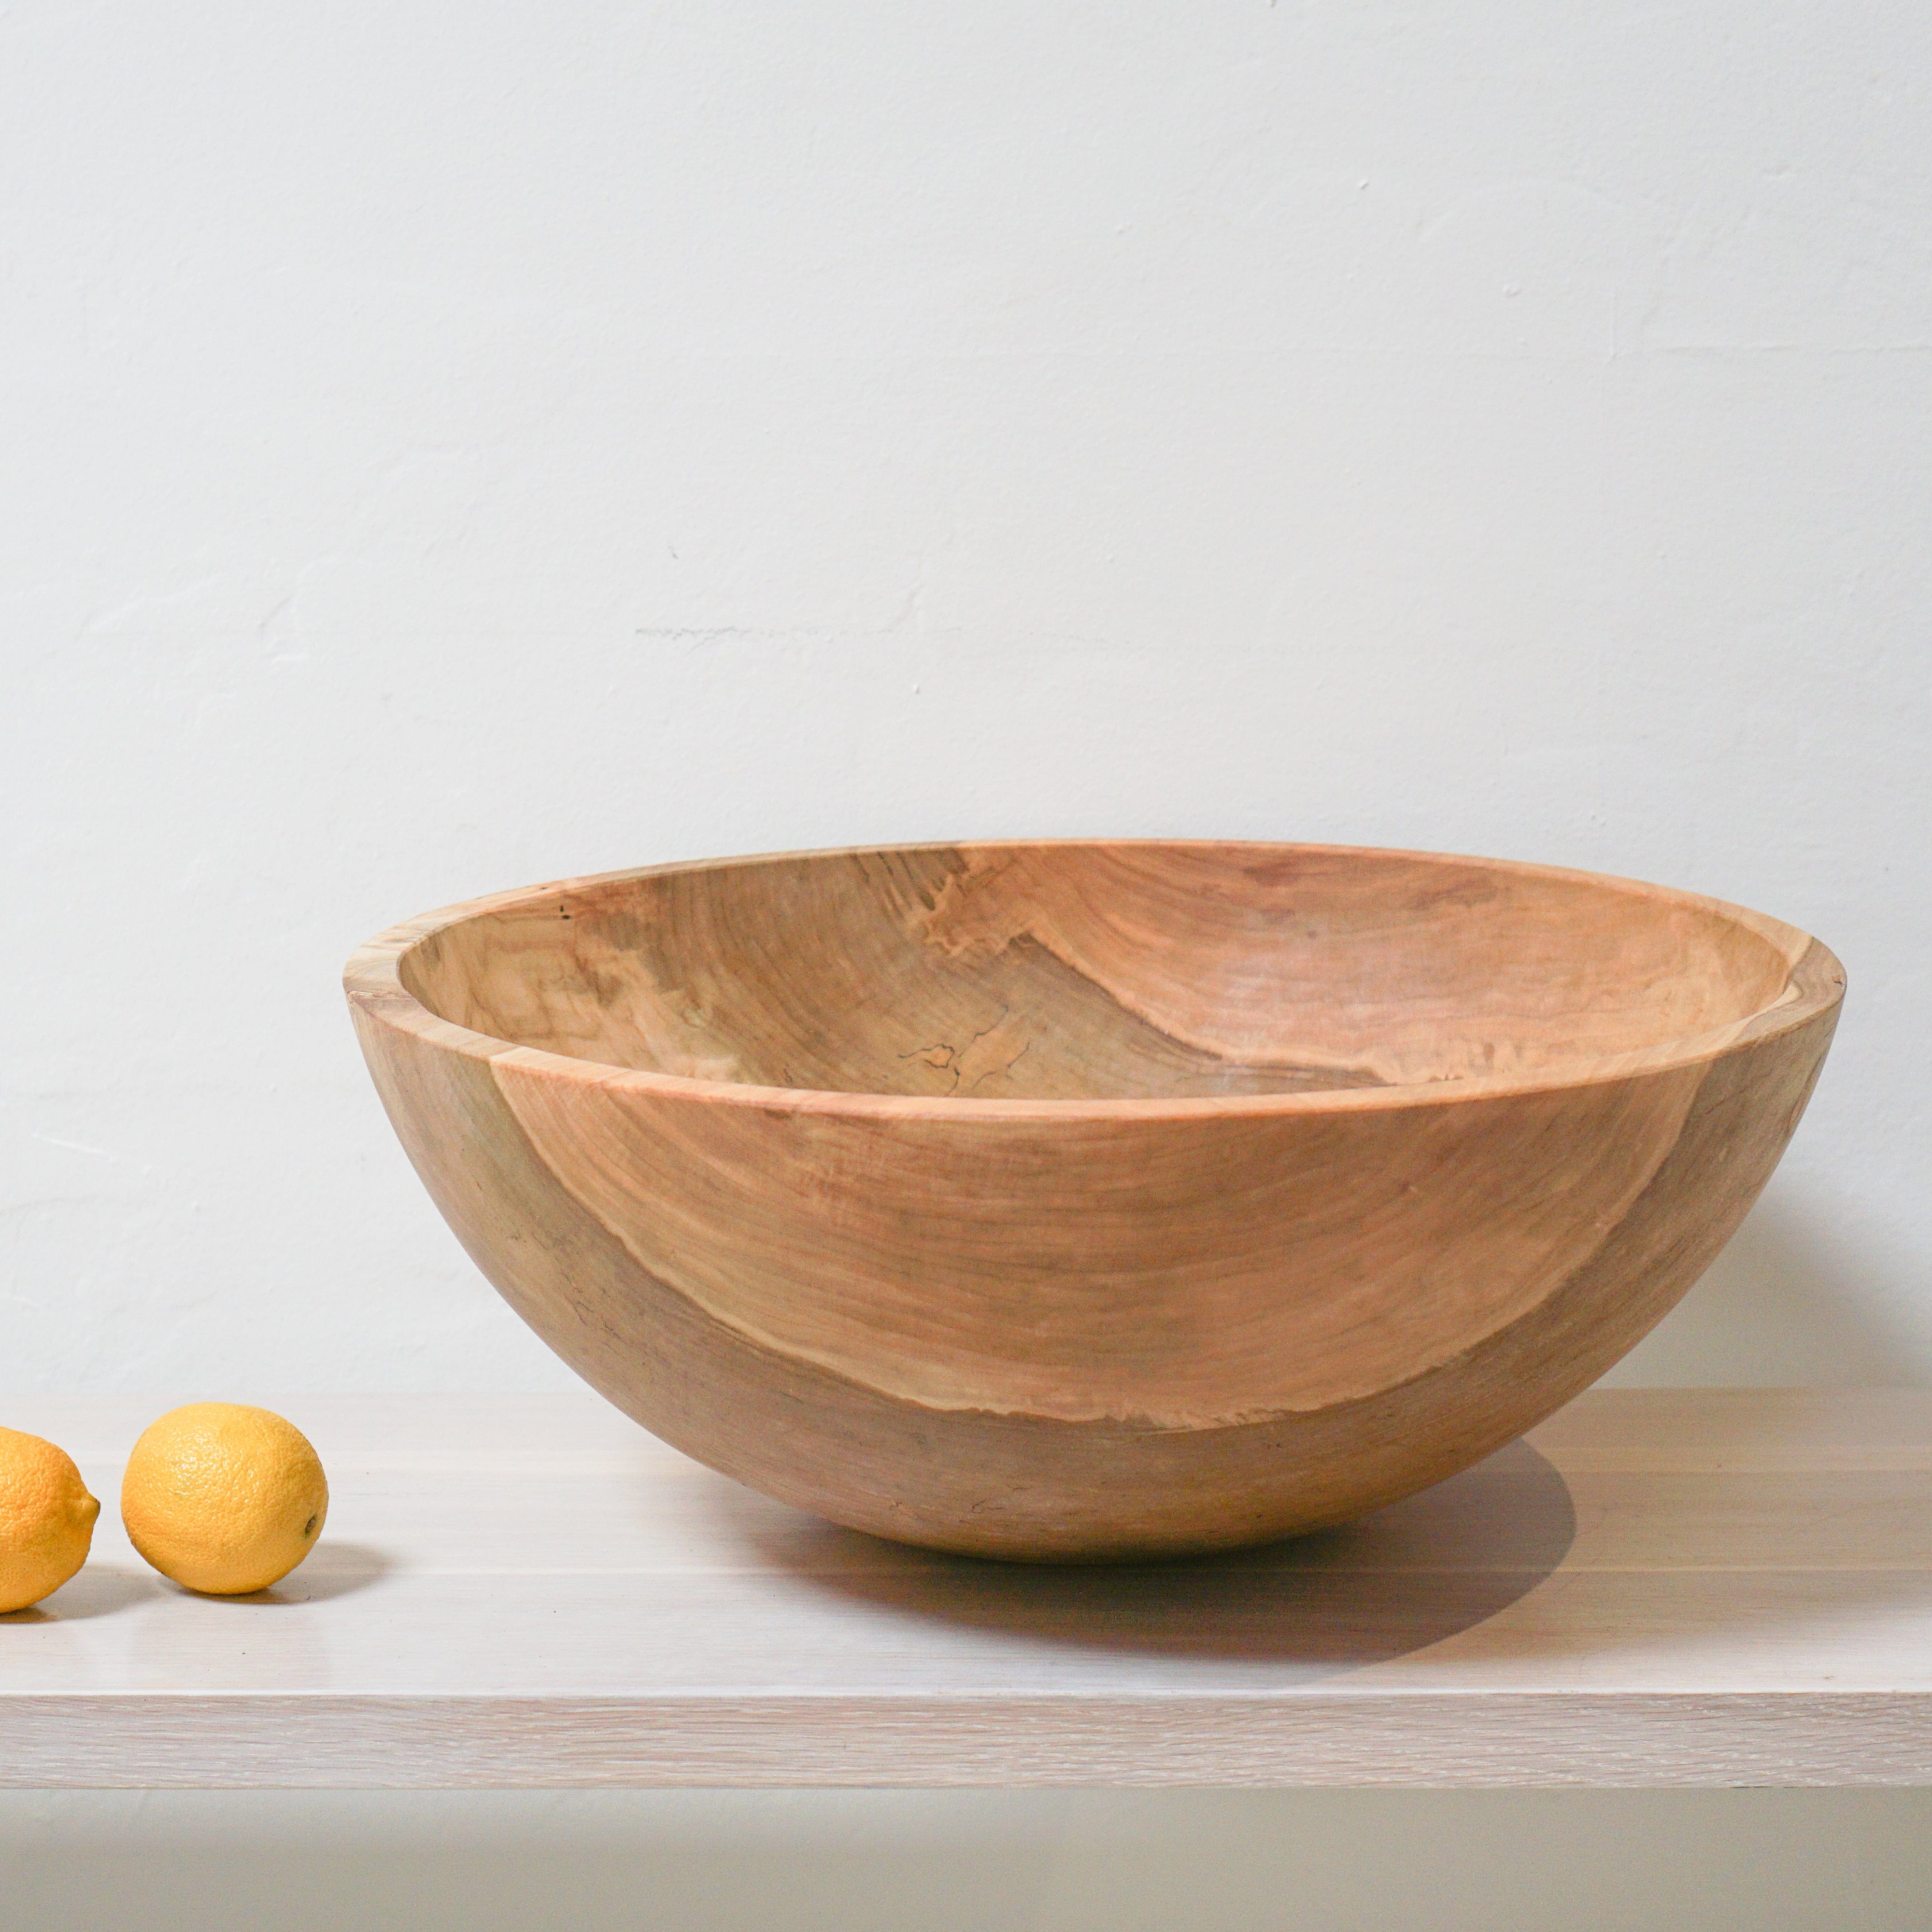 Spencer Peterman Bowls Spalted Maple / 21" Round Salad Bowl